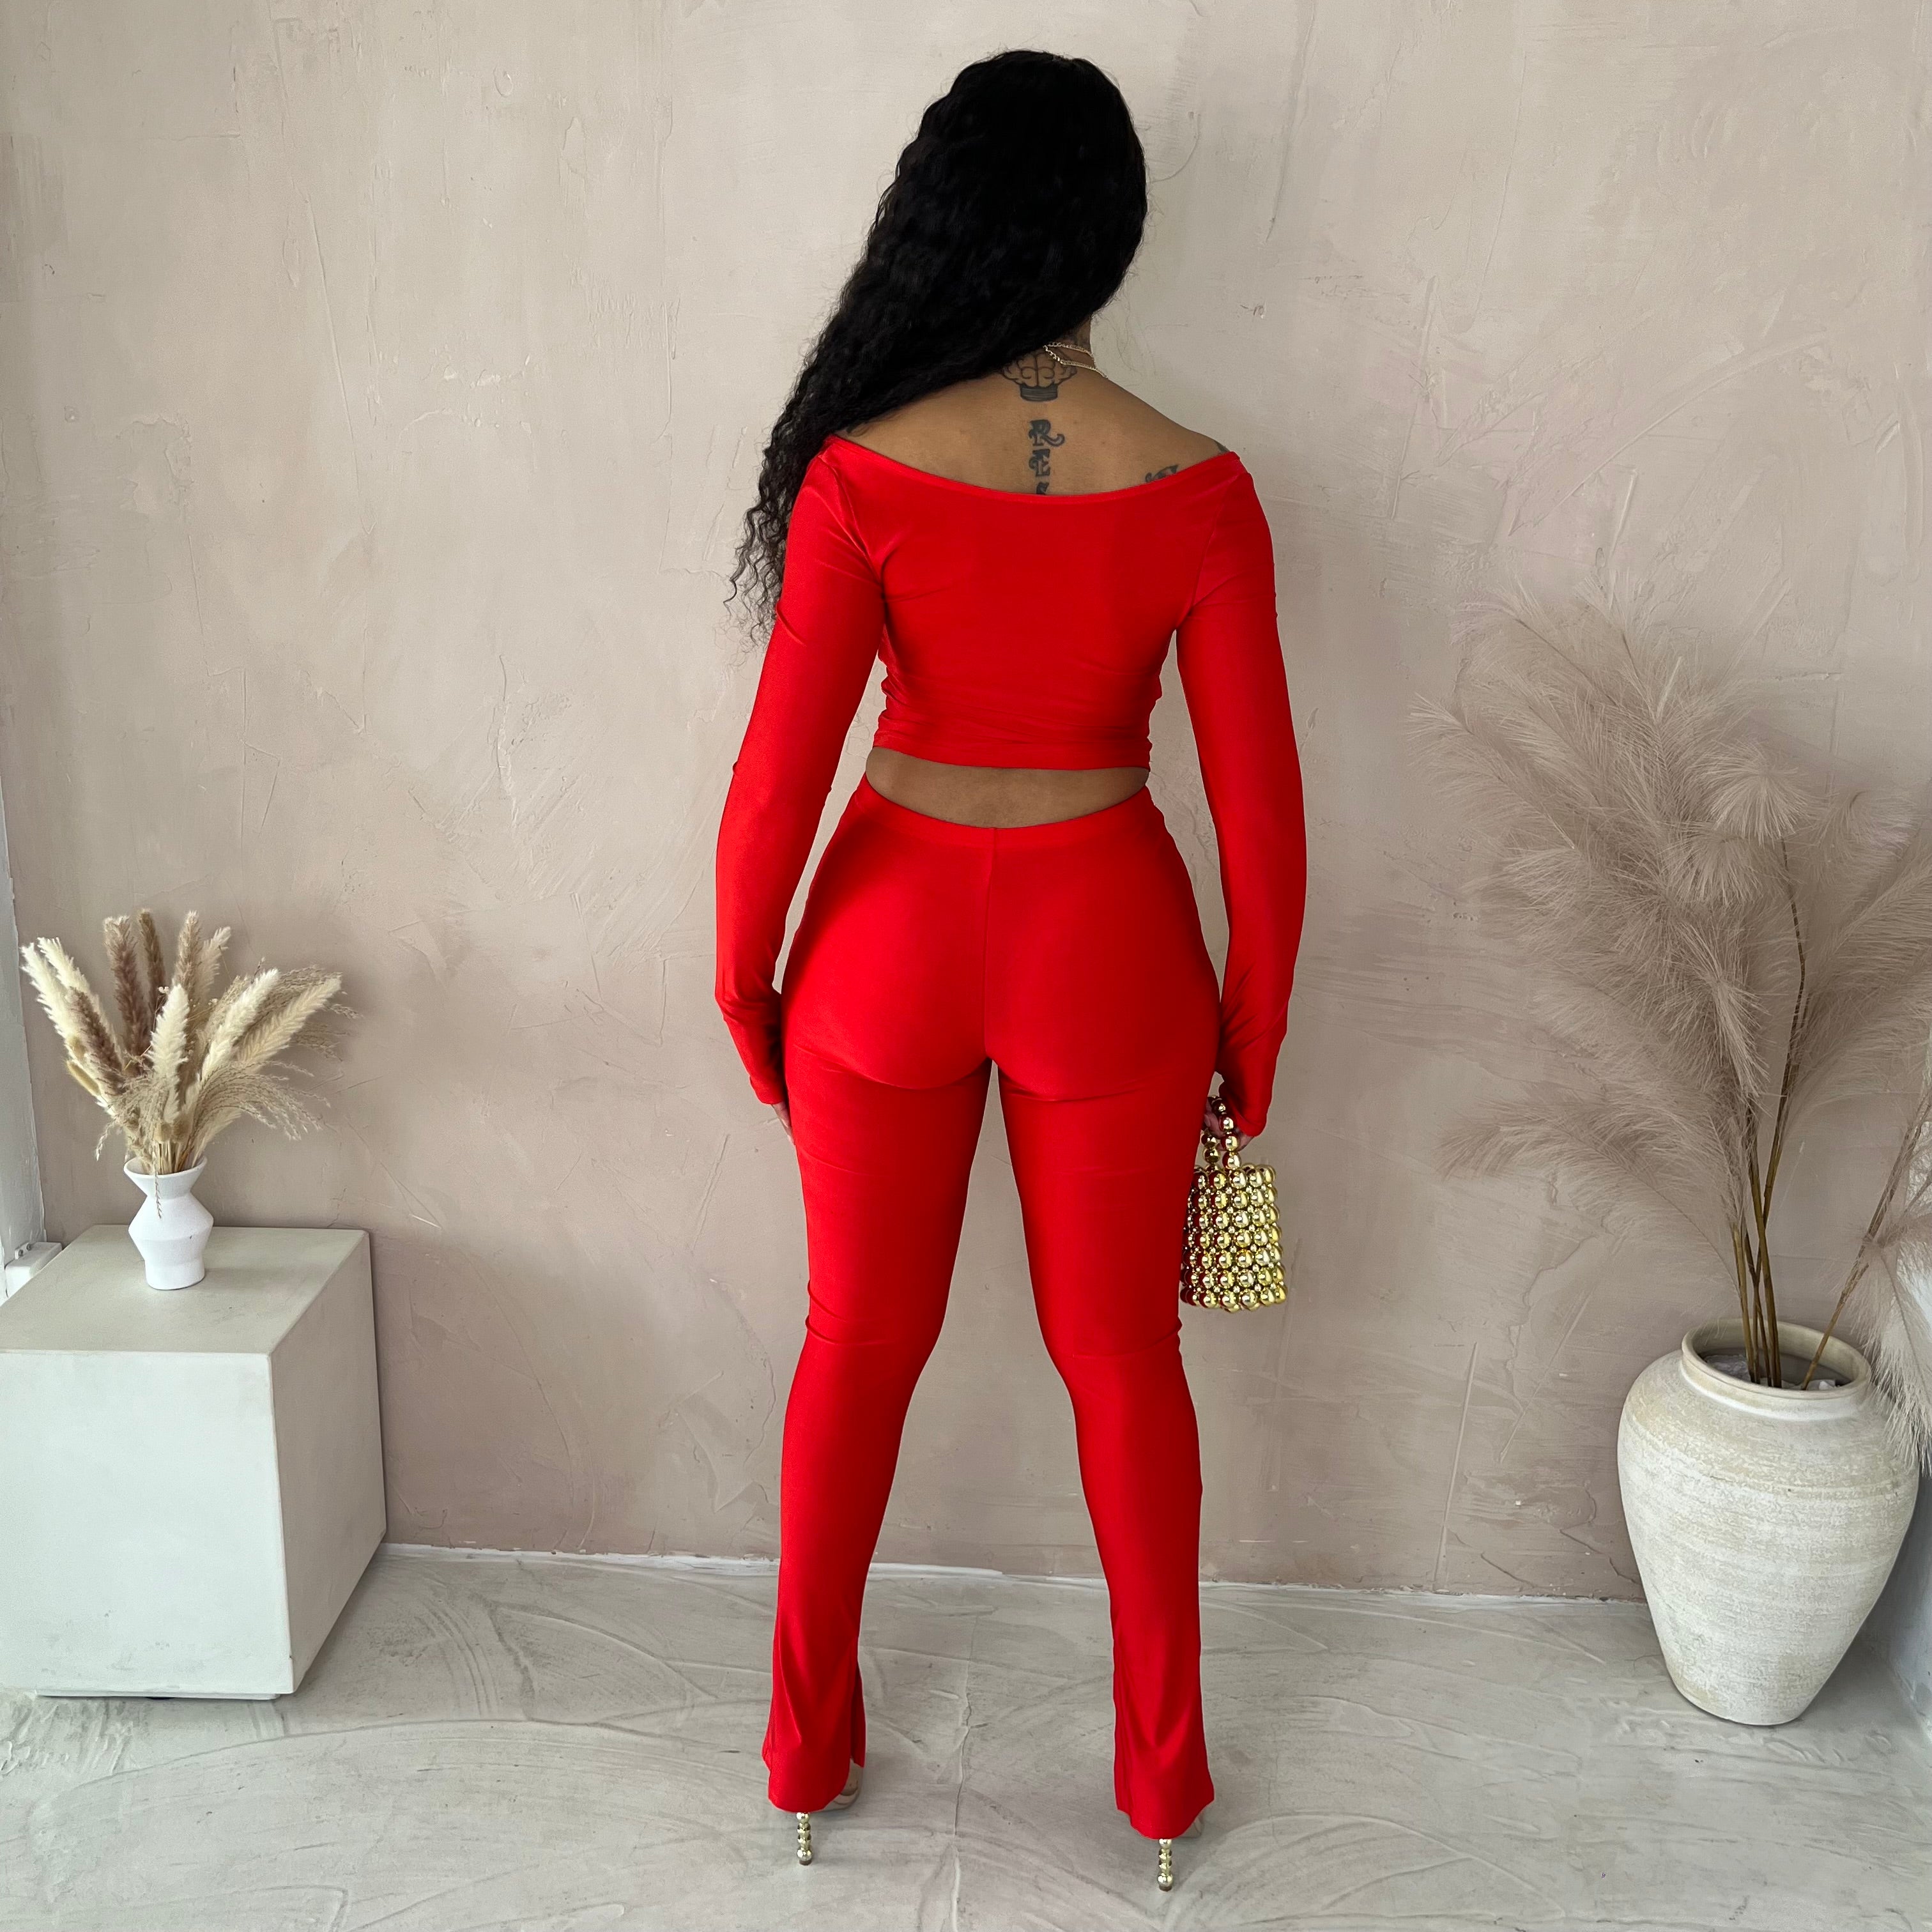 SWEETHEART SET-RED